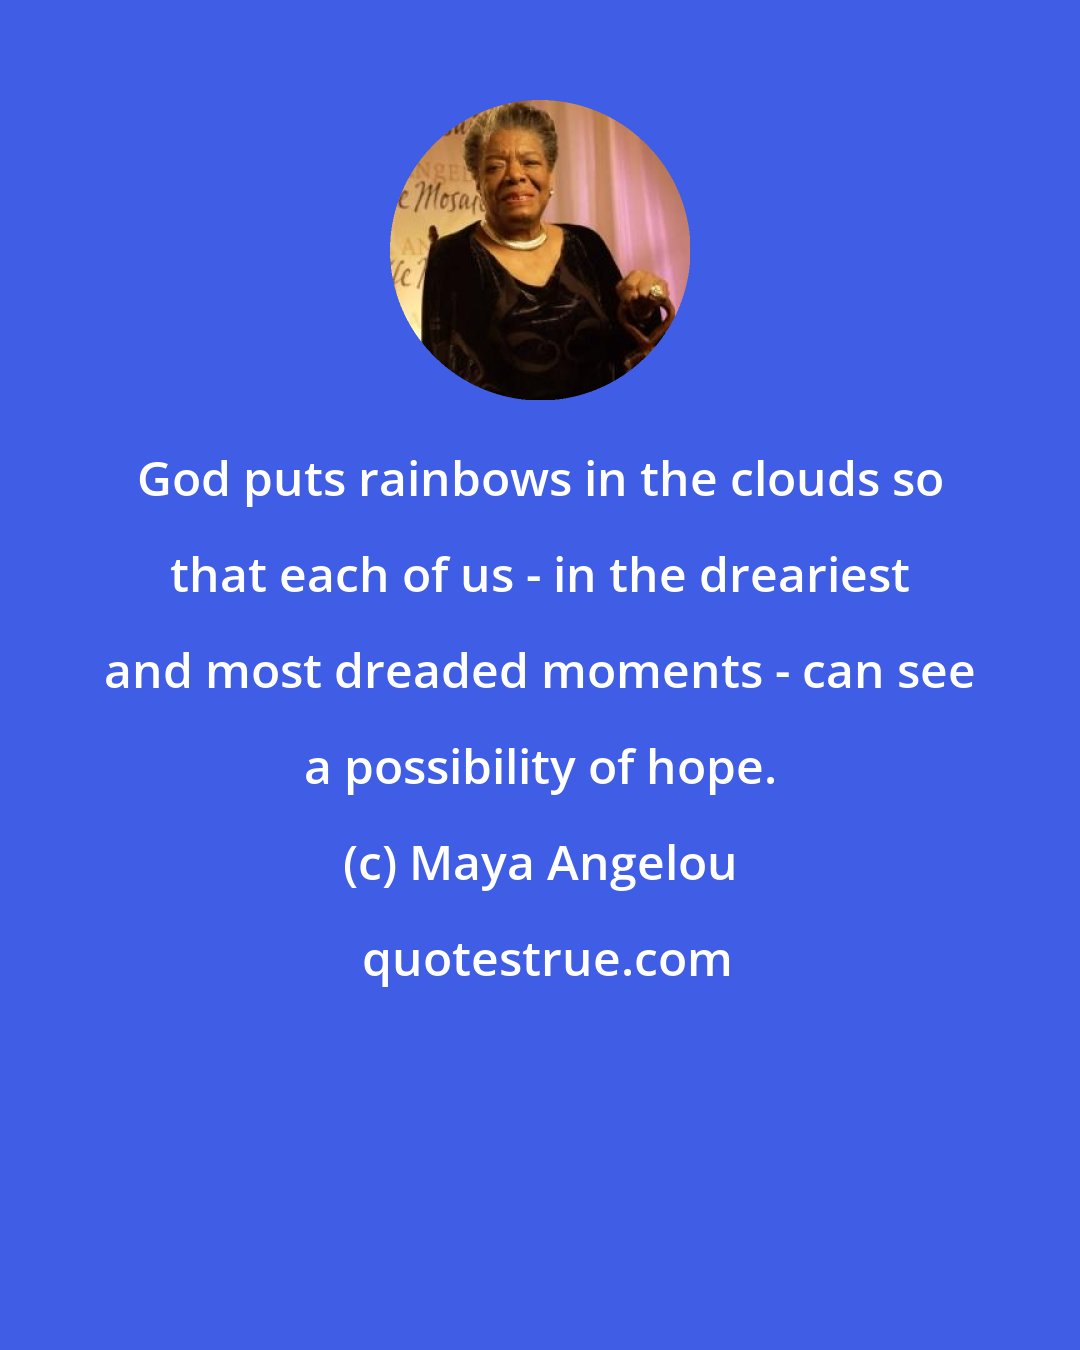 Maya Angelou: God puts rainbows in the clouds so that each of us - in the dreariest and most dreaded moments - can see a possibility of hope.